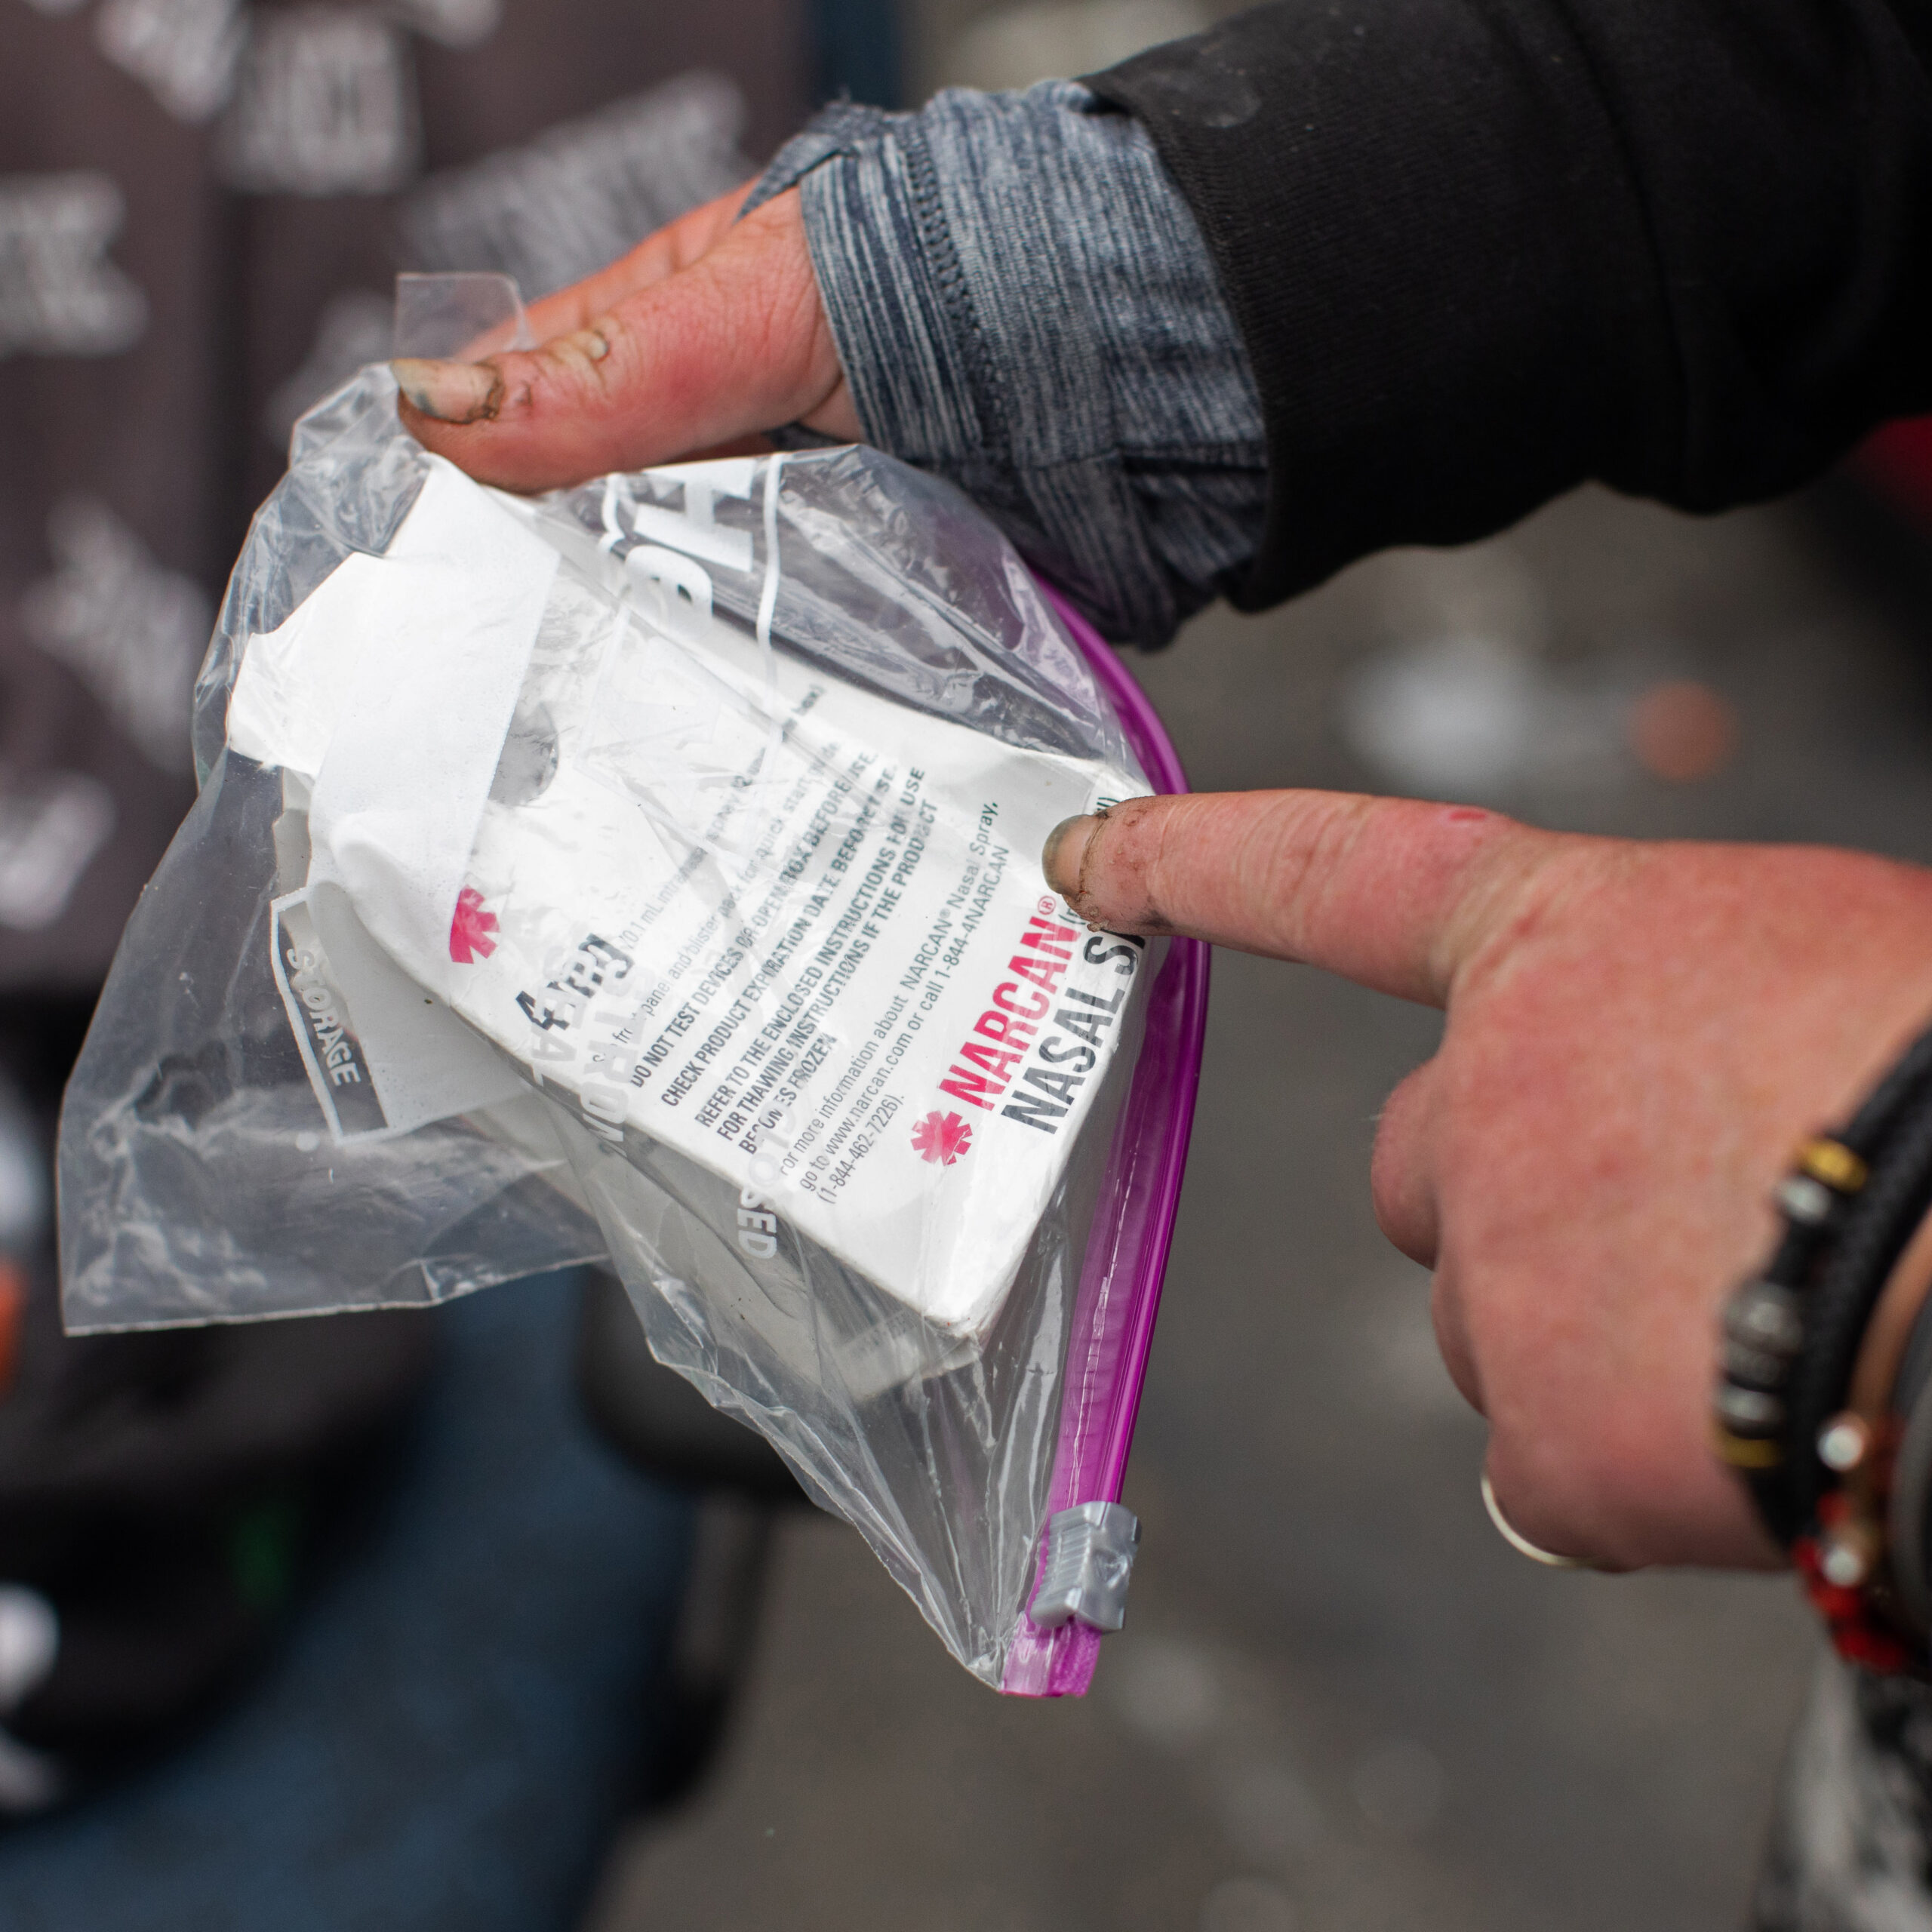 A woman points to a box of narcan.